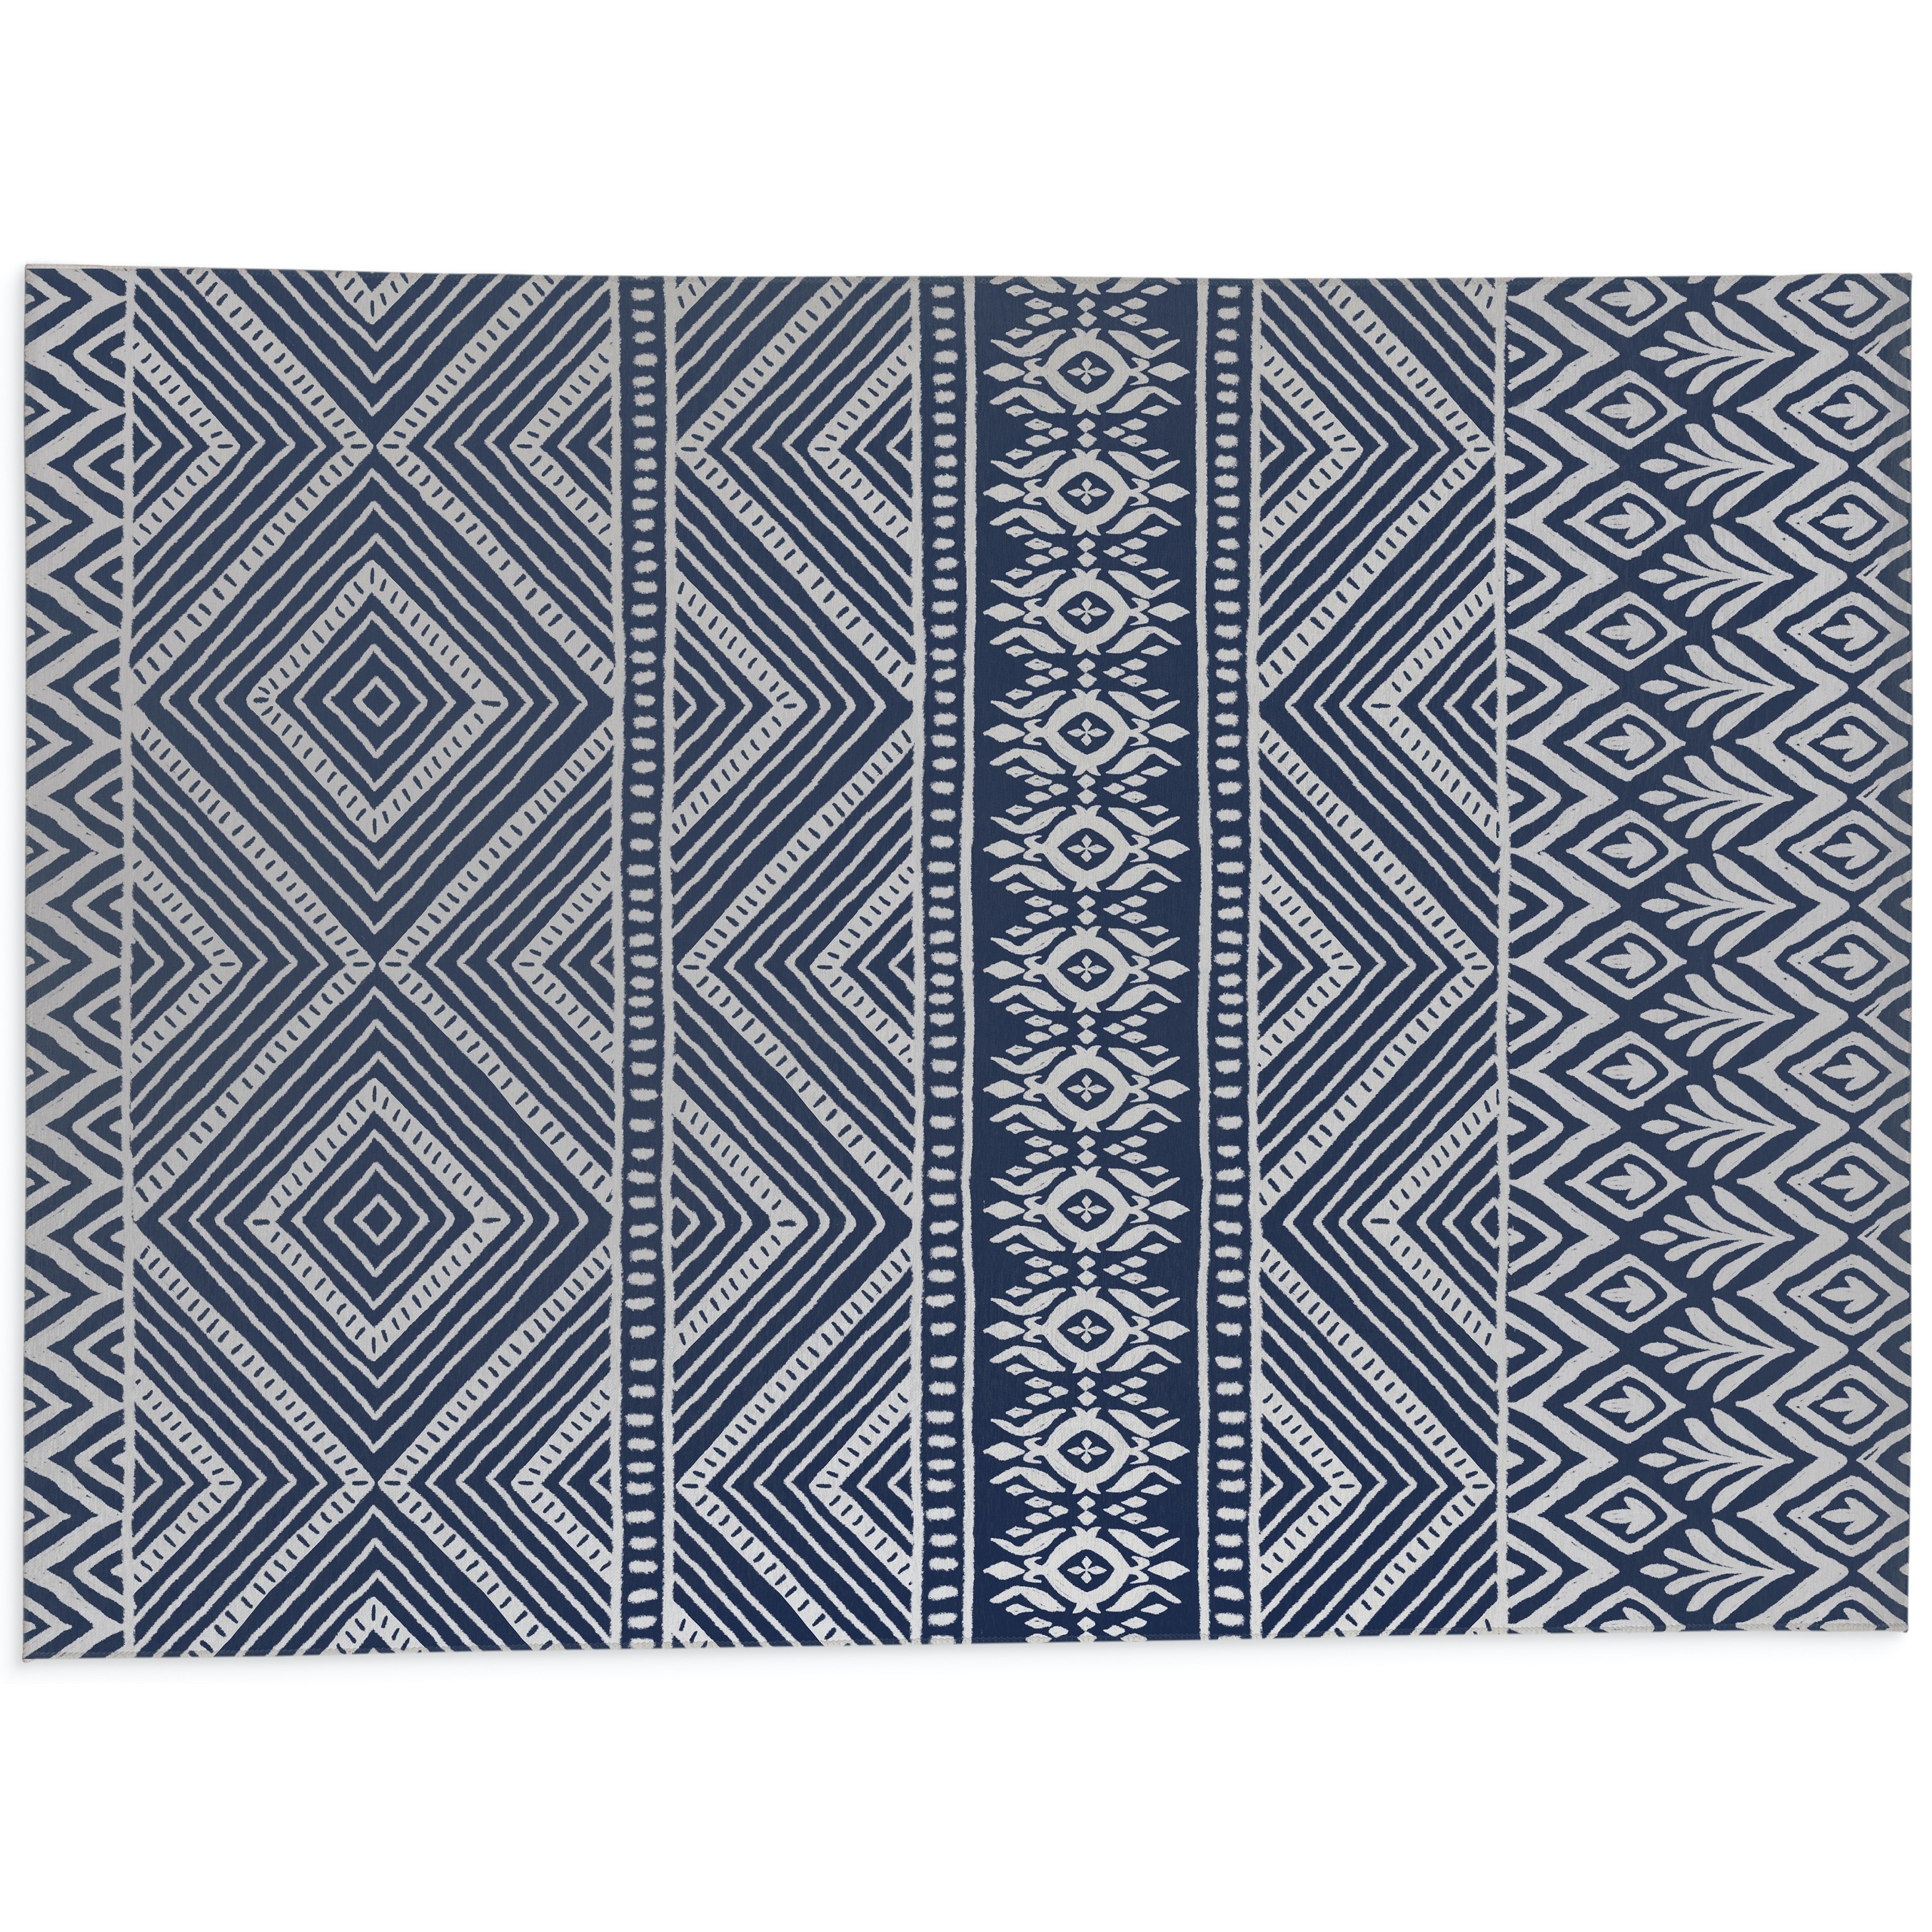 https://ak1.ostkcdn.com/images/products/is/images/direct/442ea4154ce32abb1d16d7e85614f225ed35bb1a/SCANDI-IKAT-NAVY-Indoor-Floor-Mat-By-Kavka-Designs.jpg